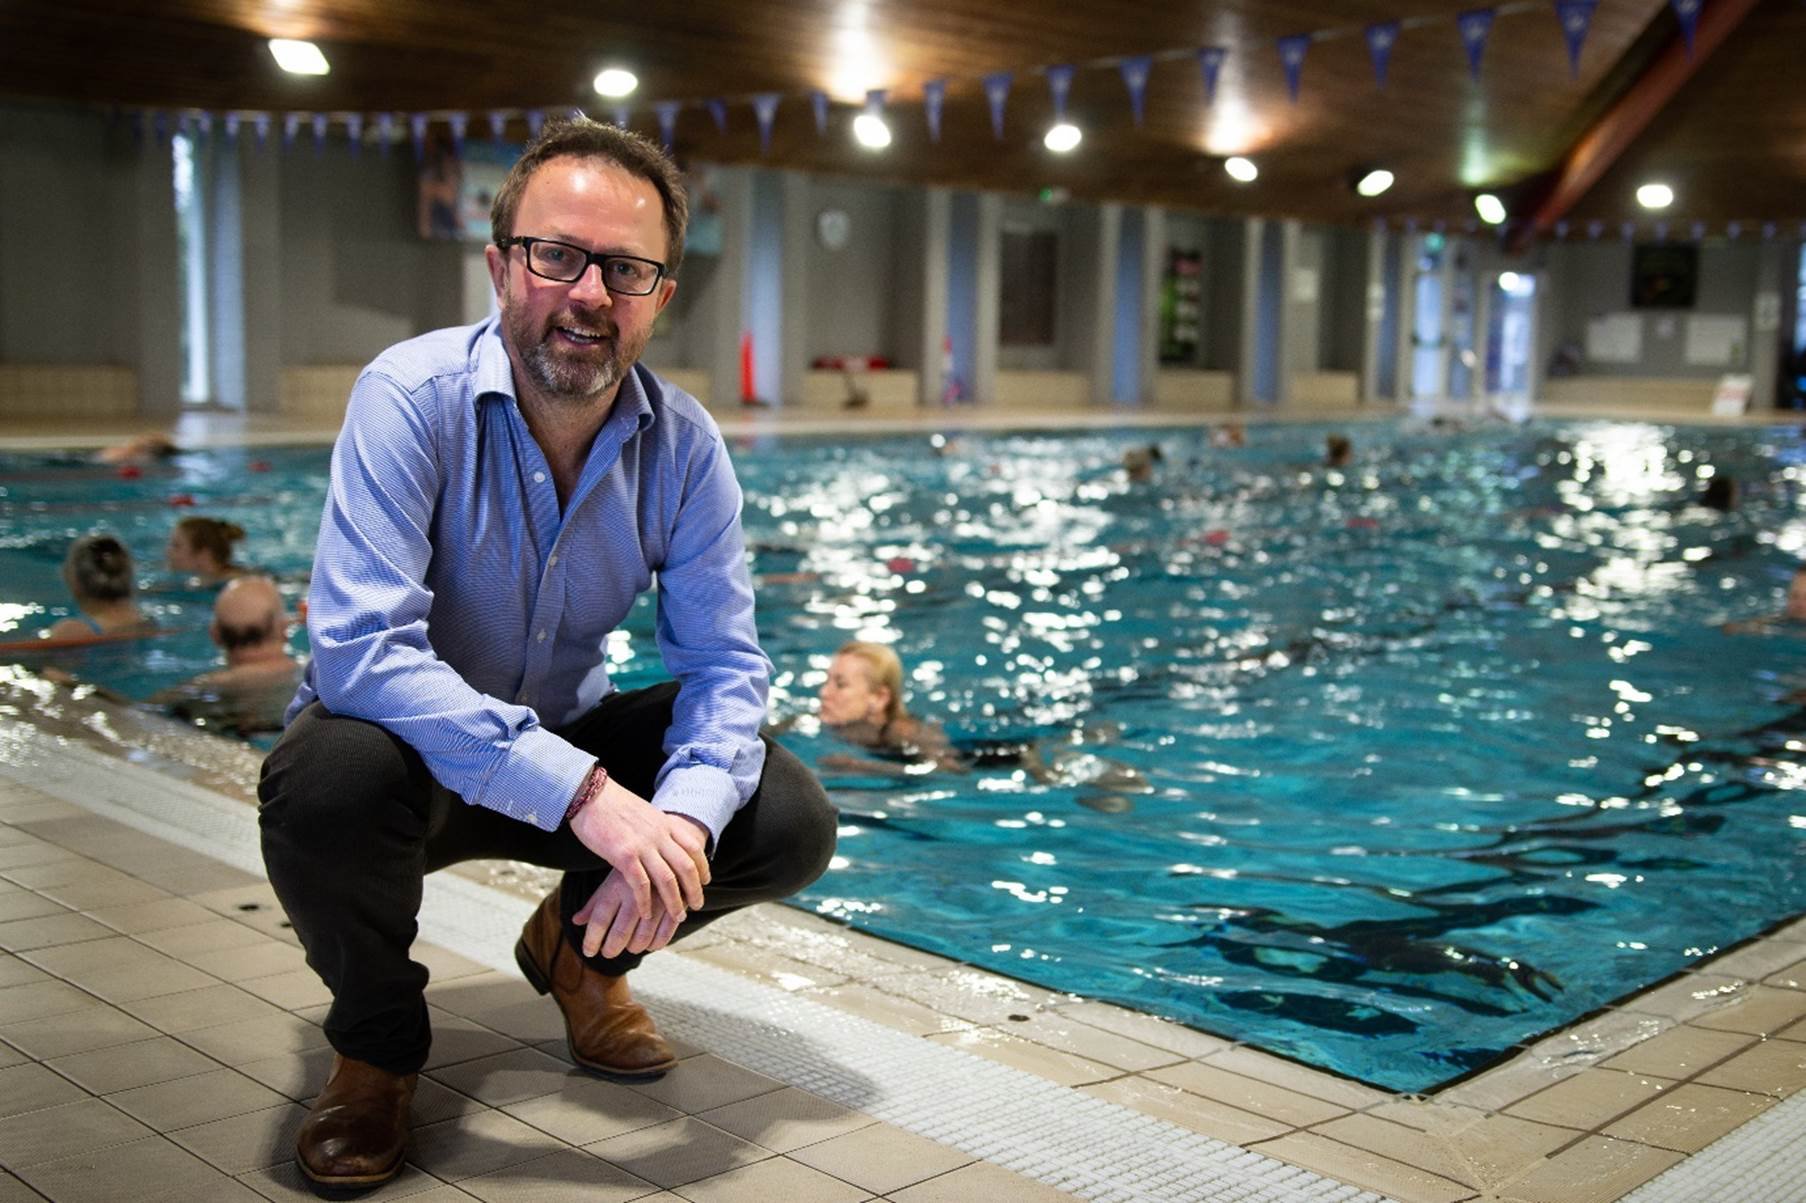 UK data center startup offers to heat Britain's swimming pools with waste  heat - DCD